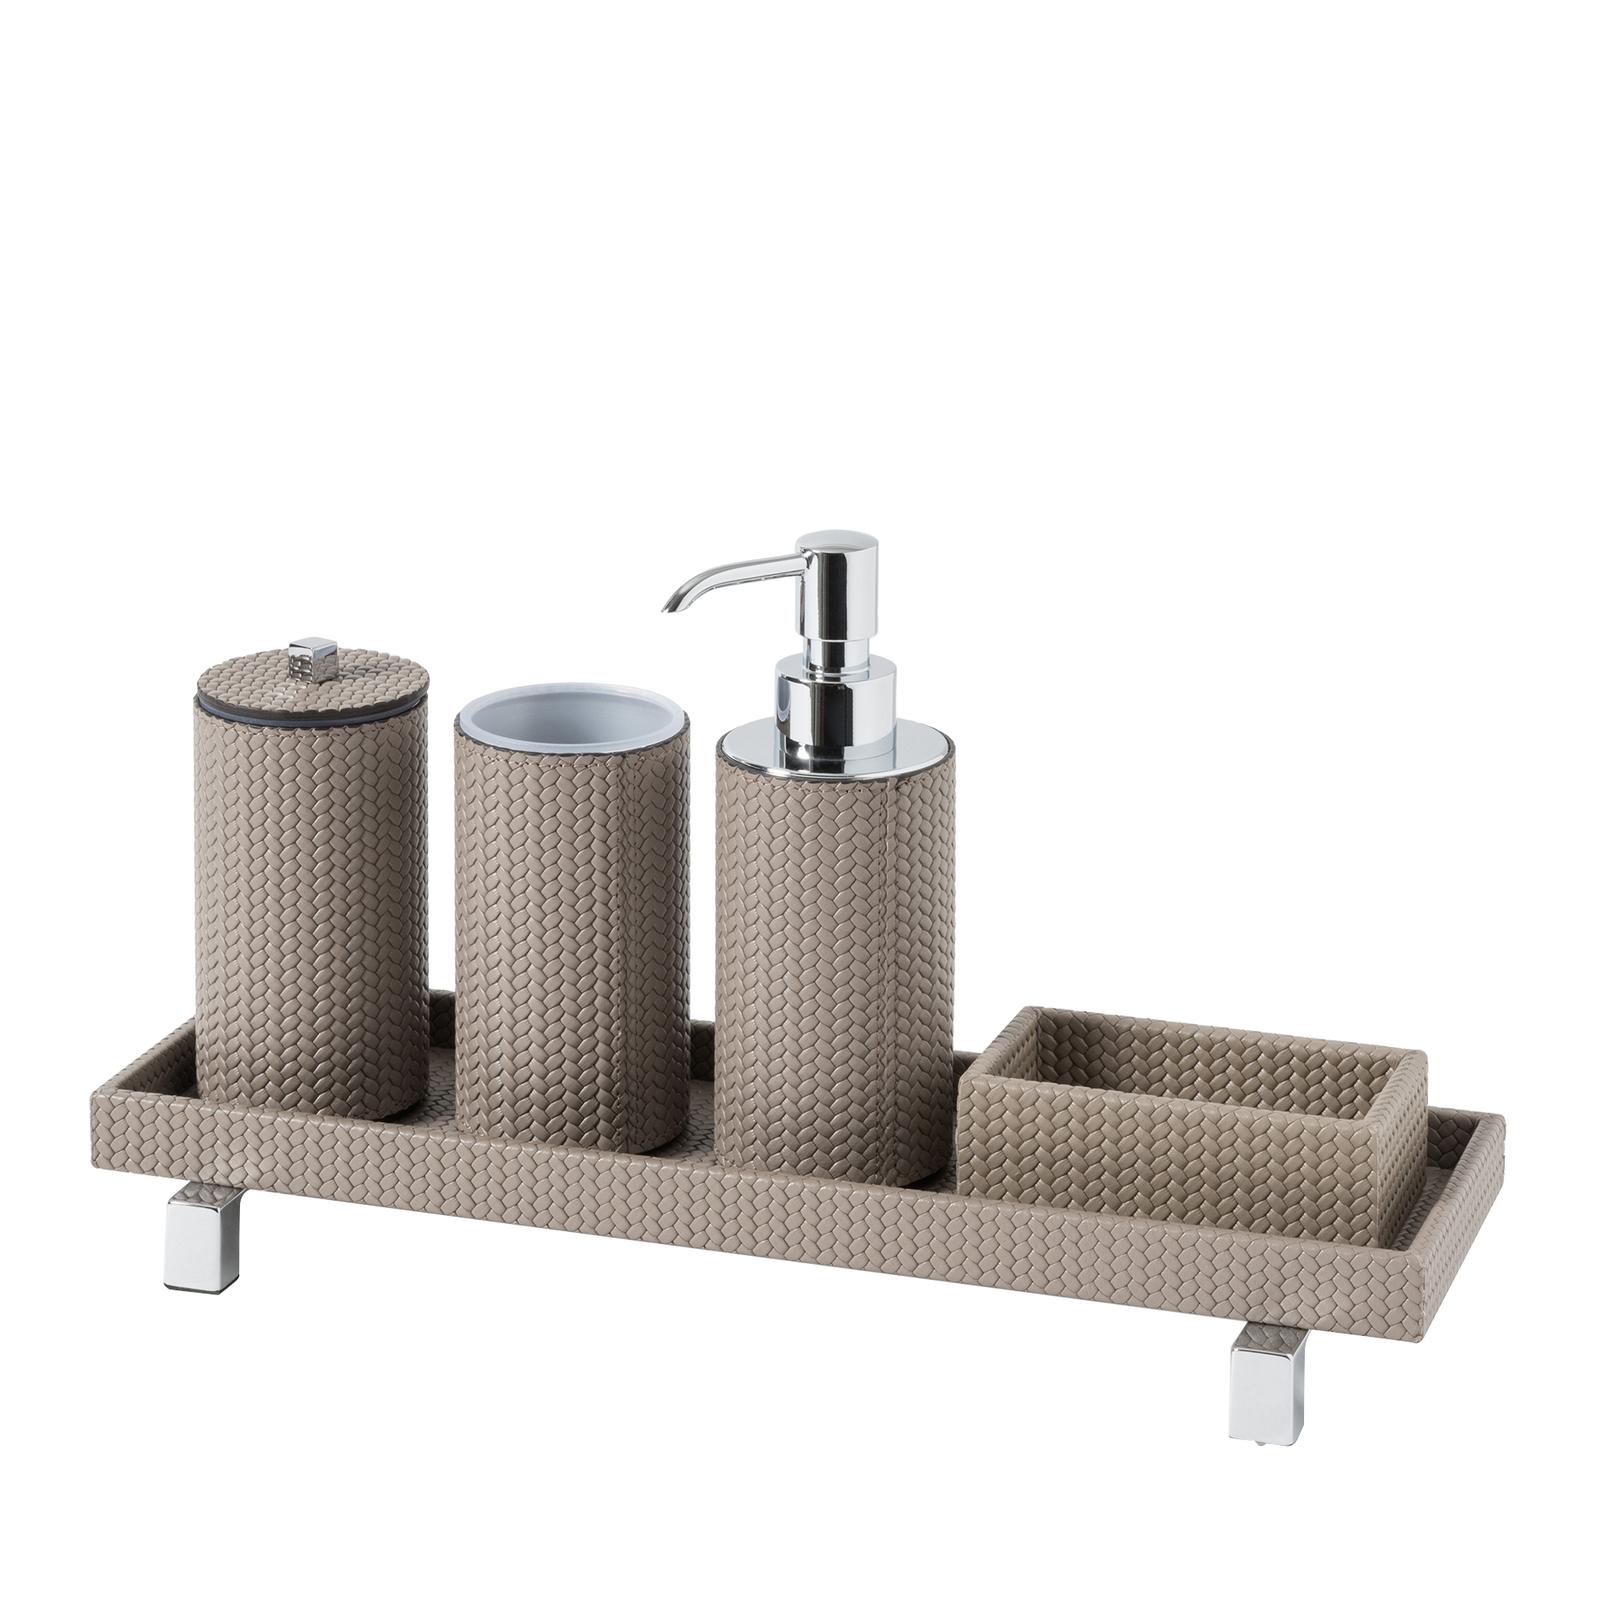 Poseidon Round Bathroom Set In New Condition For Sale In Milan, IT